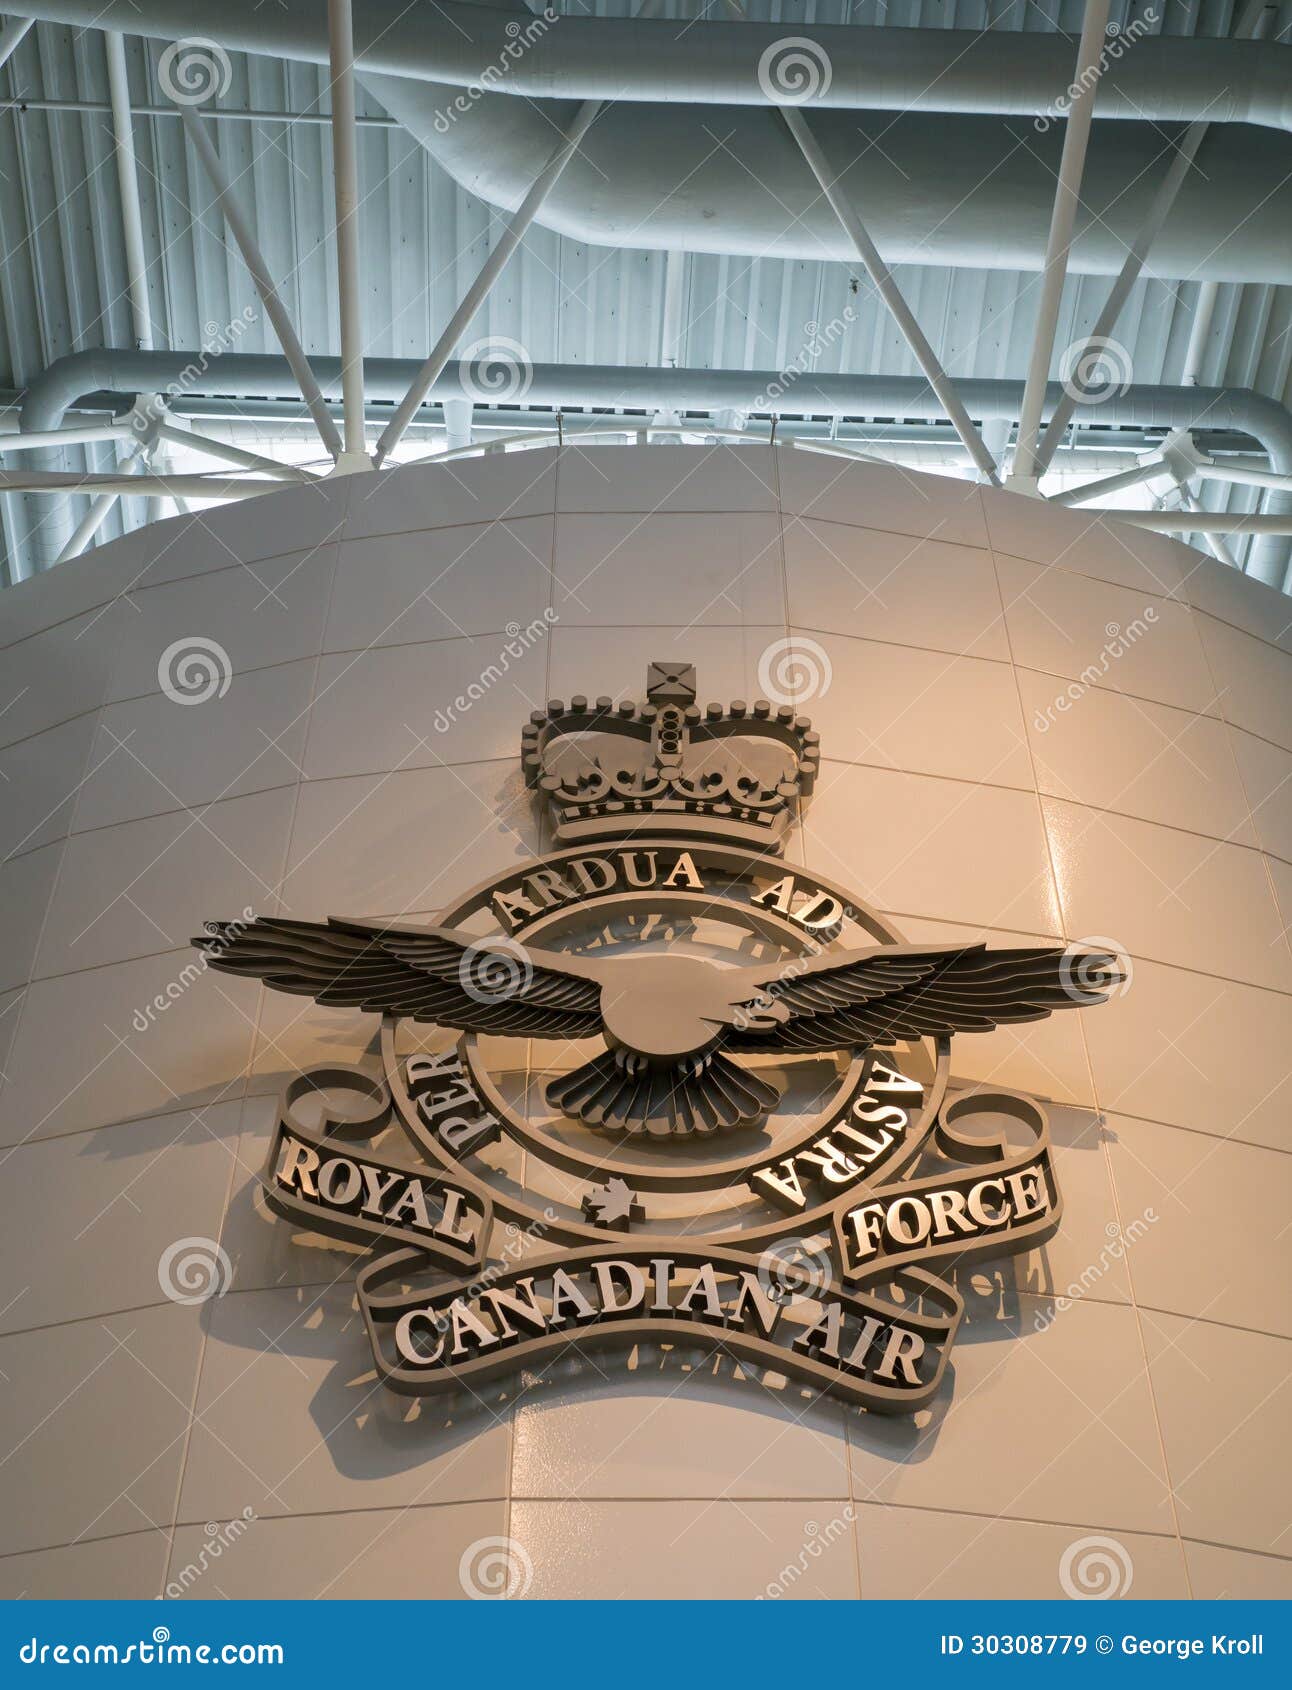 Royal Canadian Air Force Logo Editorial Stock Image - Image of icon, space: 30308779